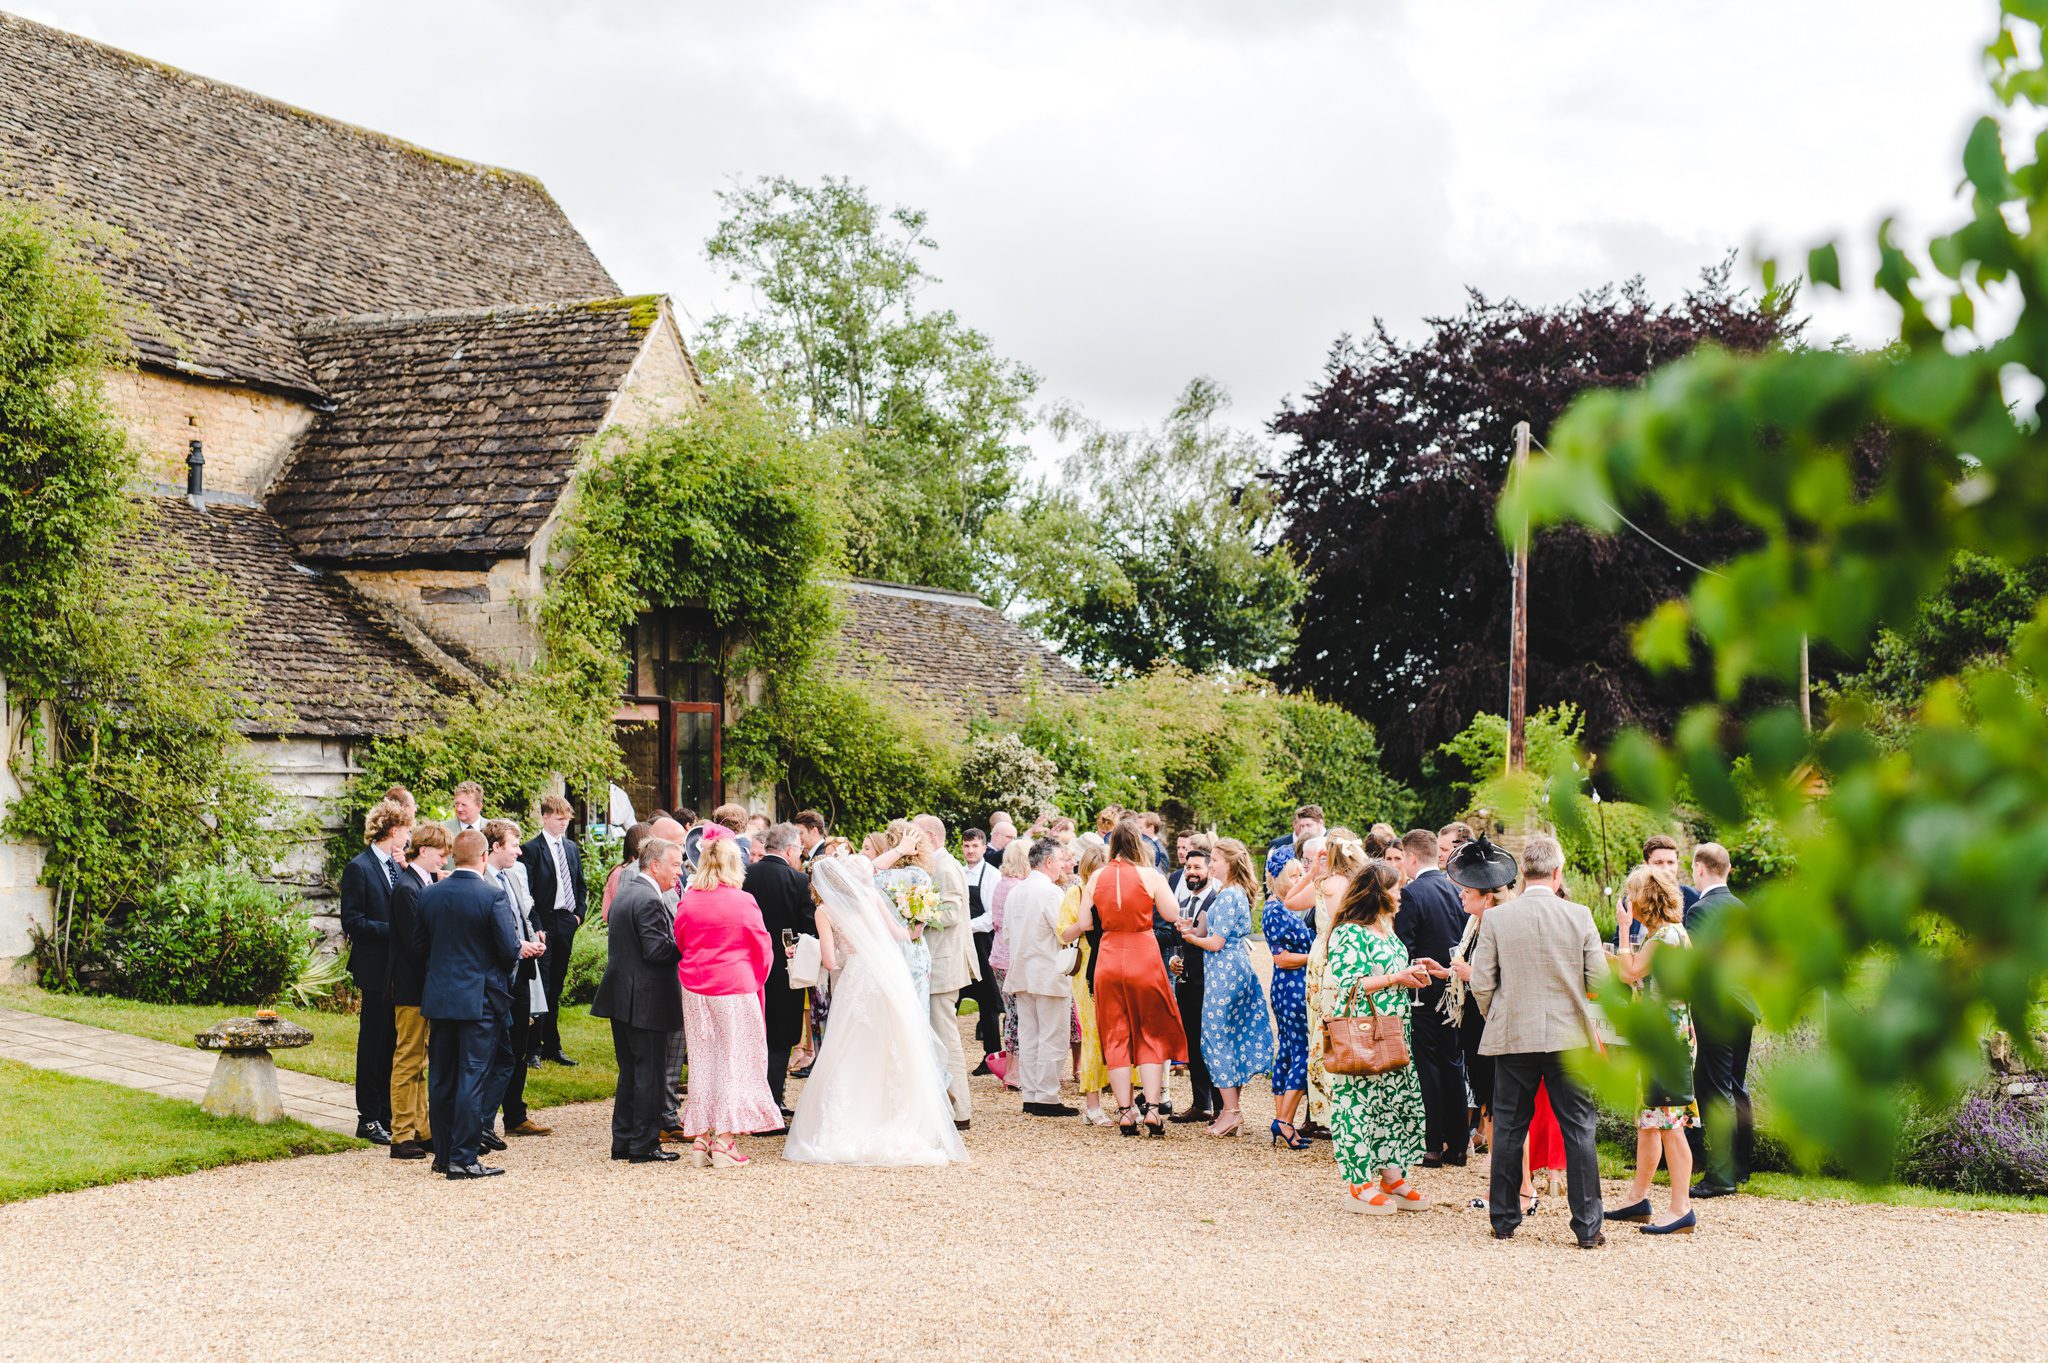 Wedding guests gathering for their drinks reception at their barn wedding in Gloucestershire